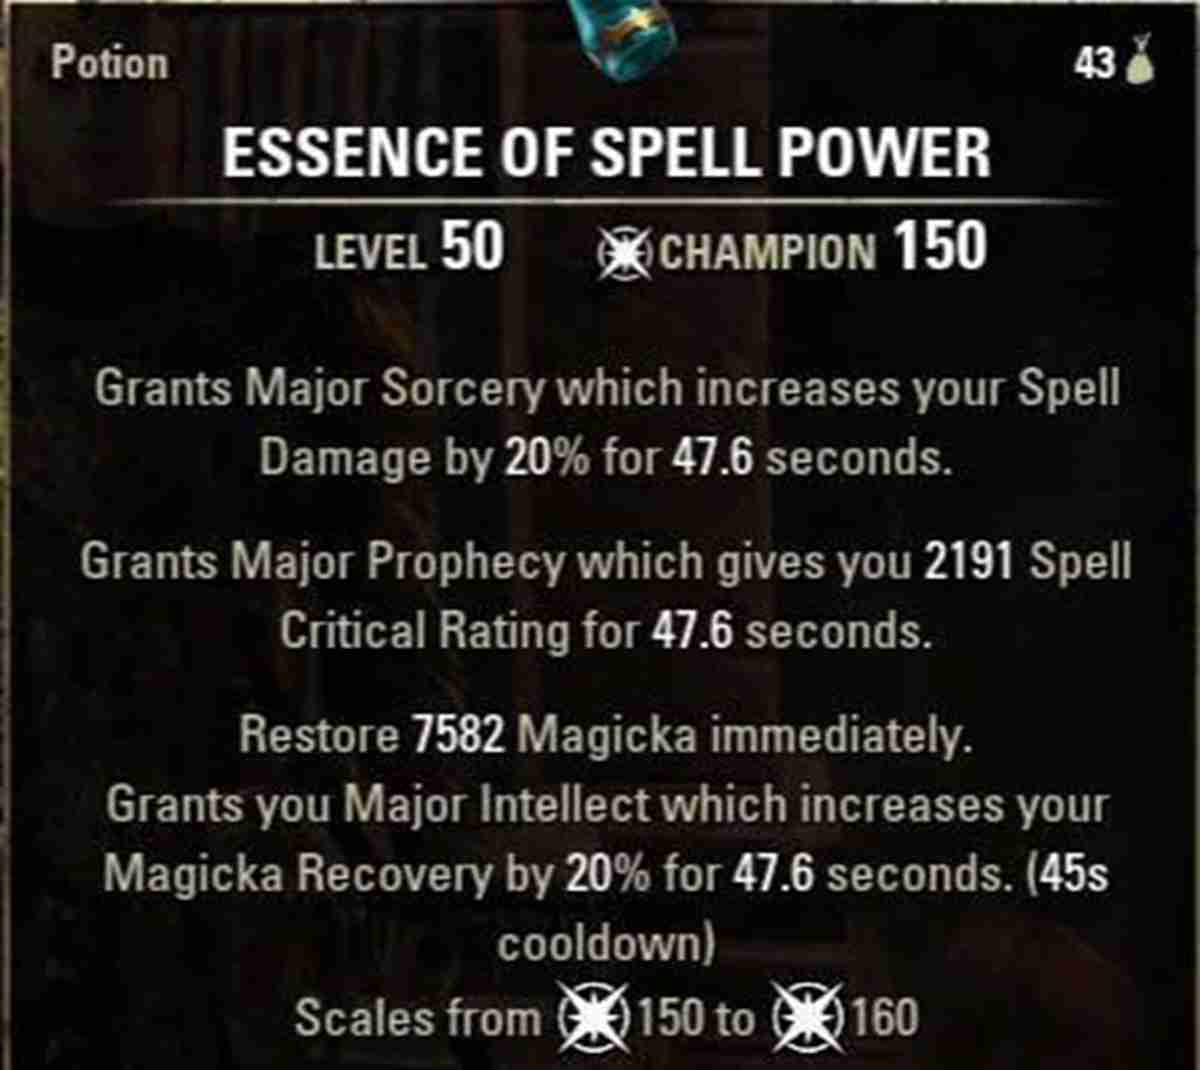 5 Best Potions in ESO - Essence of Spell Power